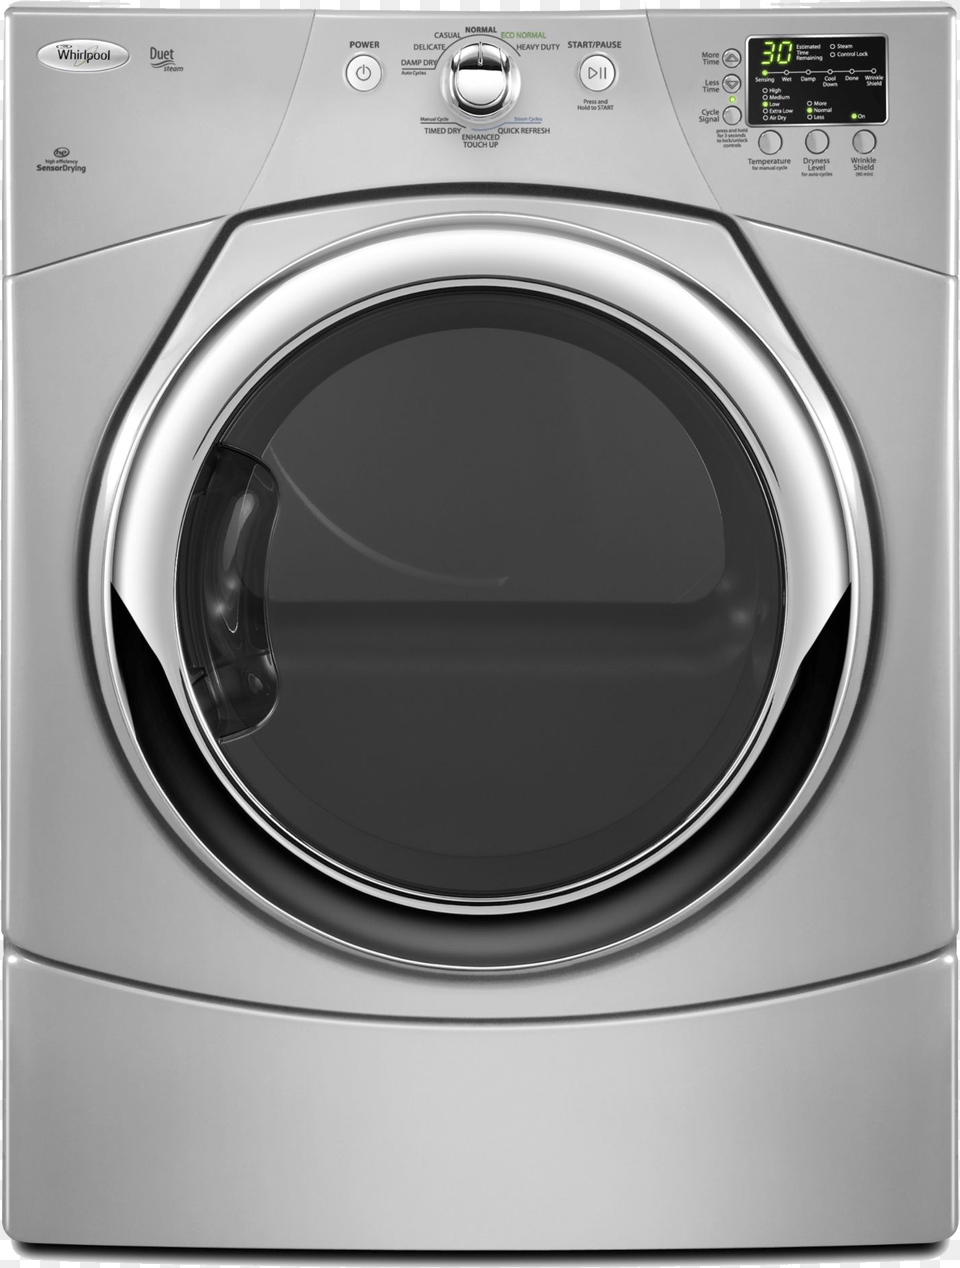 Washing Machine Repair Service Clothes Dryer, Appliance, Device, Electrical Device, Washer Png Image